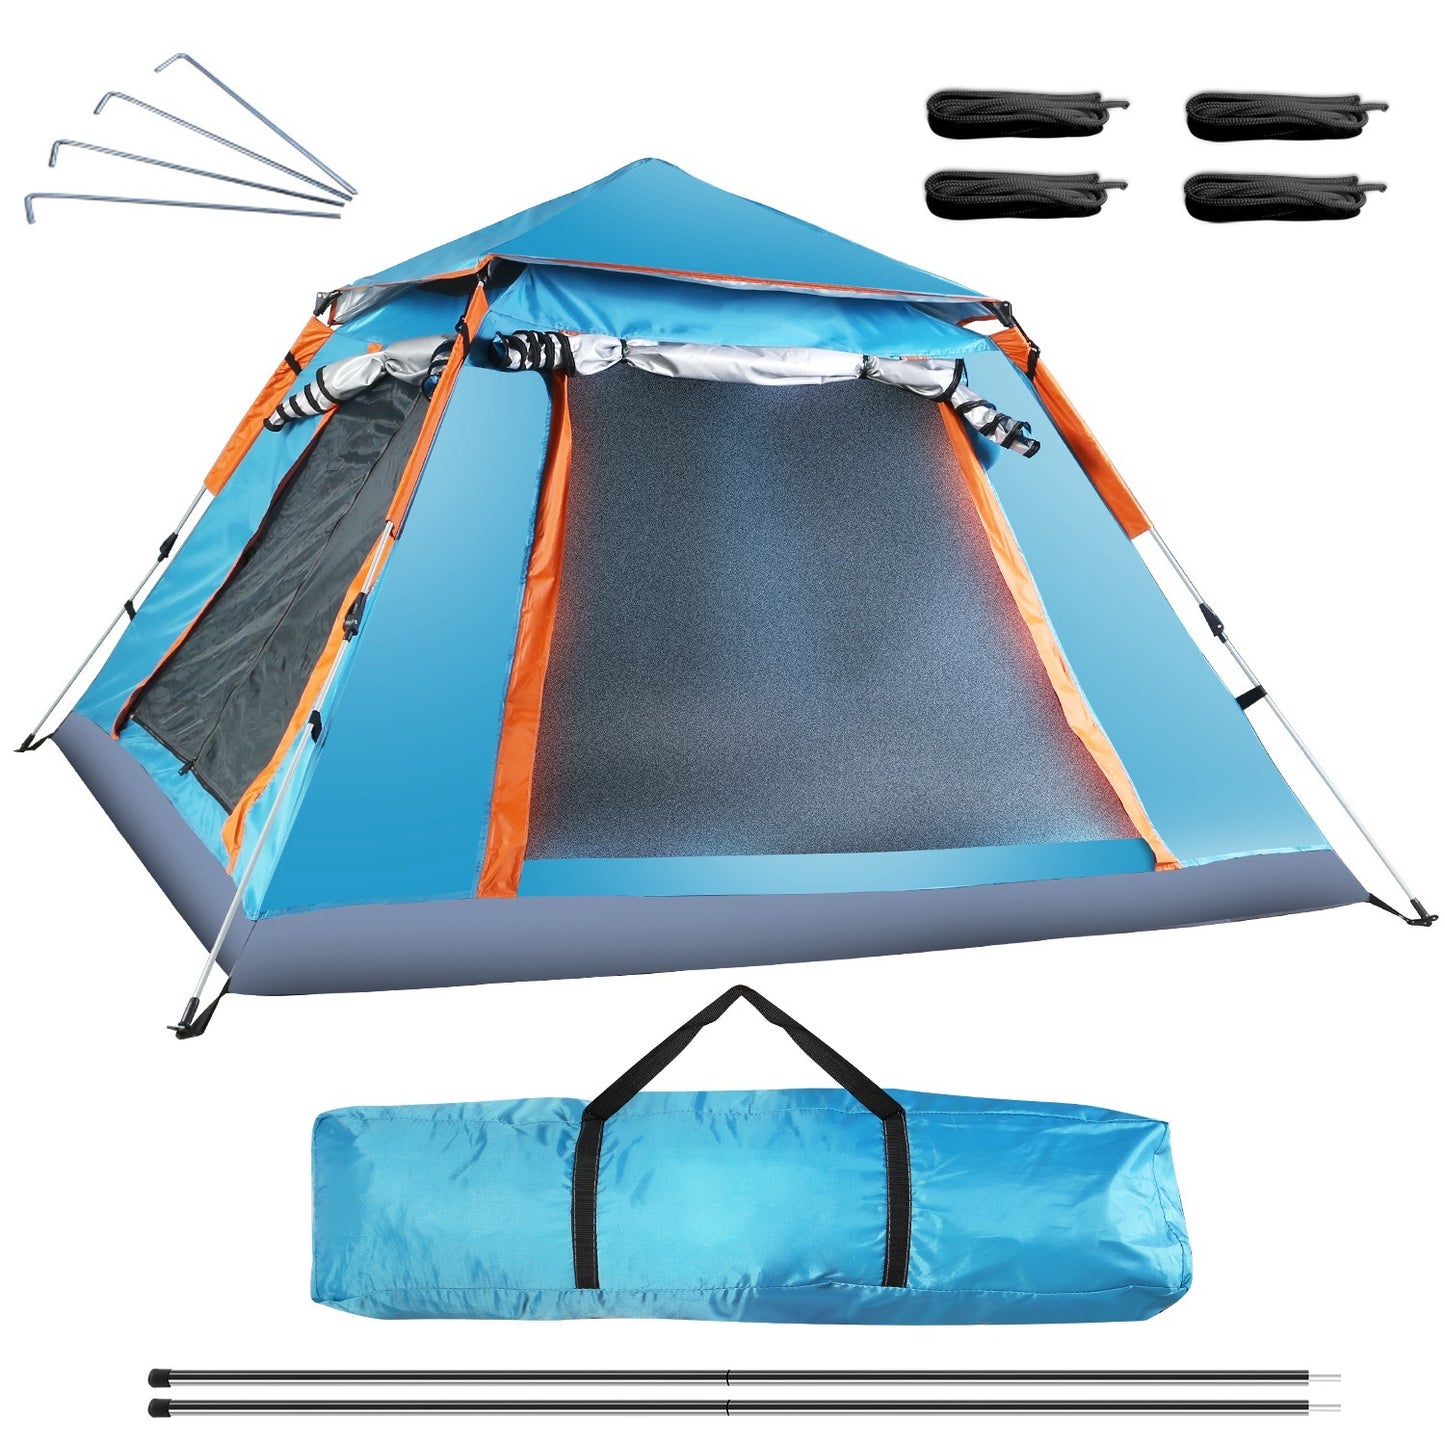 4-5 Person Camping Tent Outdoor Foldable Waterproof Tent with 2 Mosquito Nets